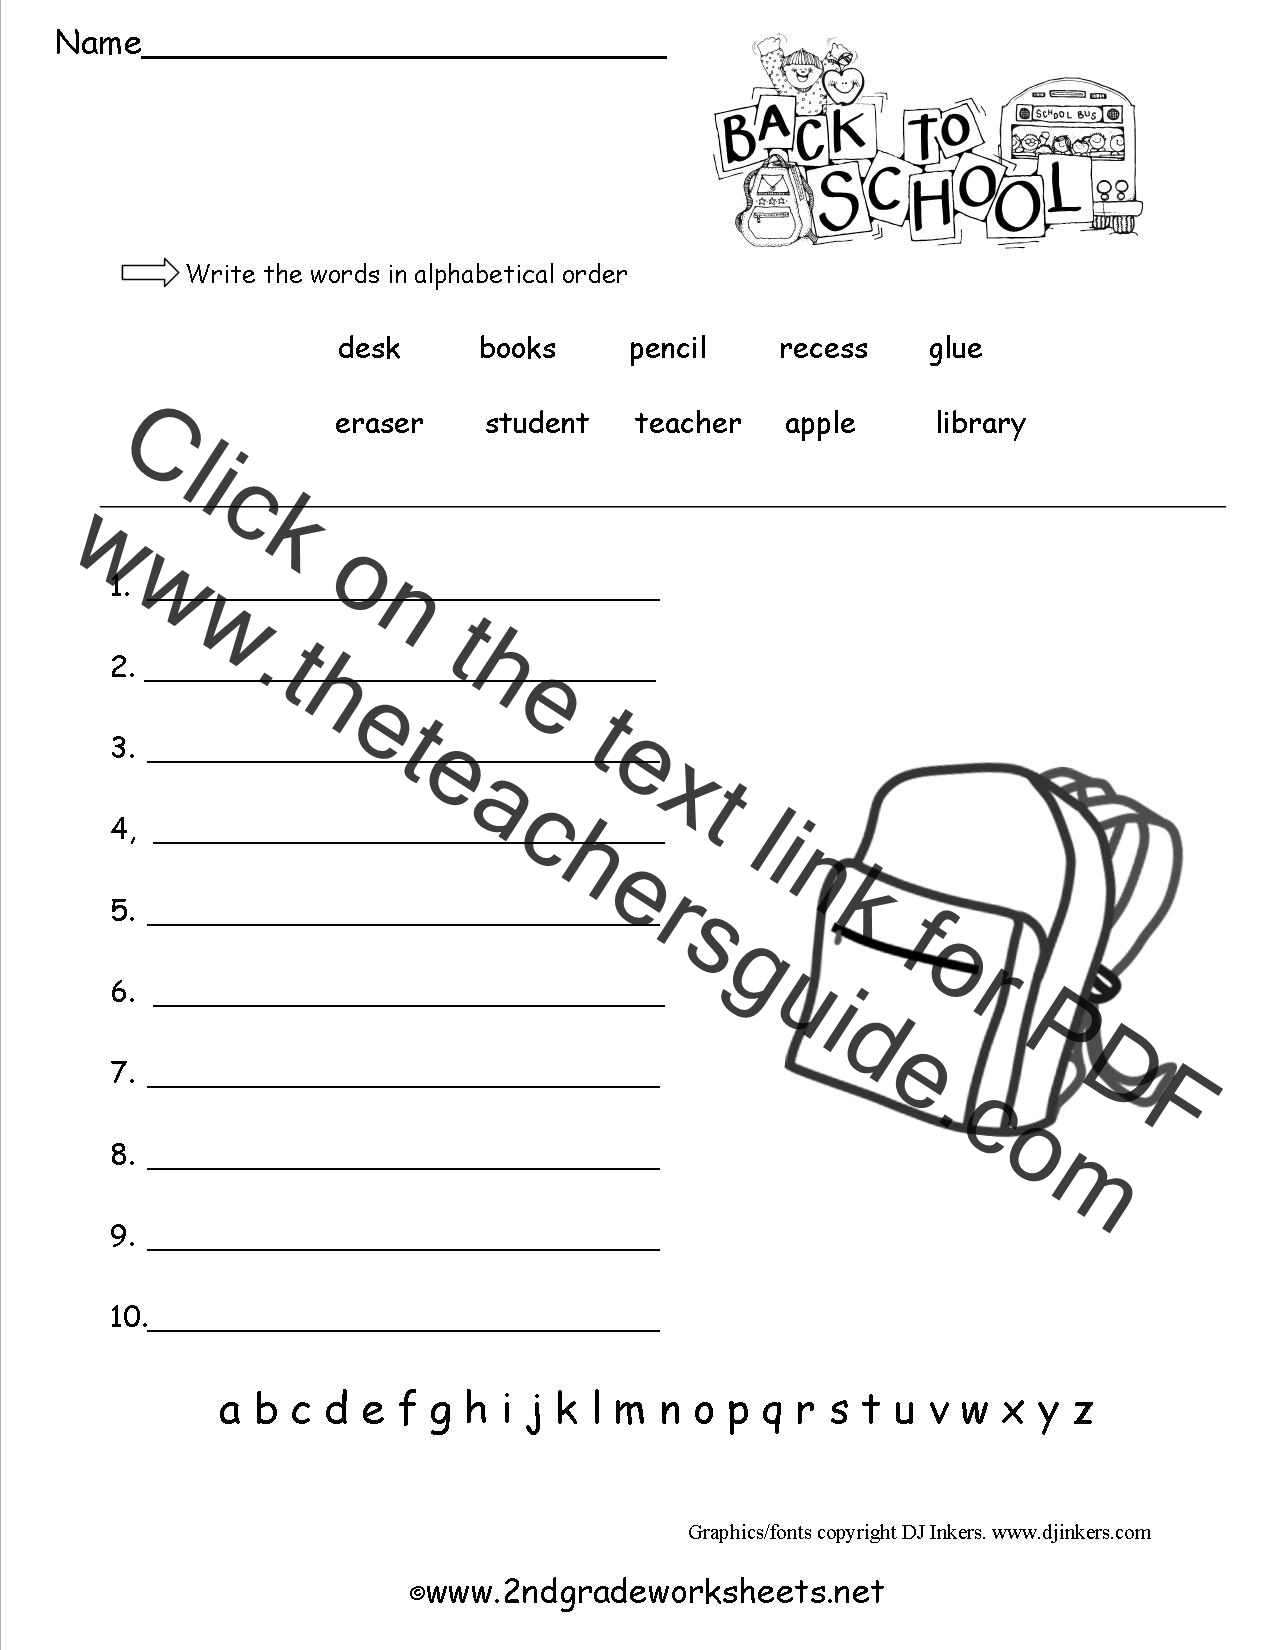 Free Back To School Worksheets And Printouts